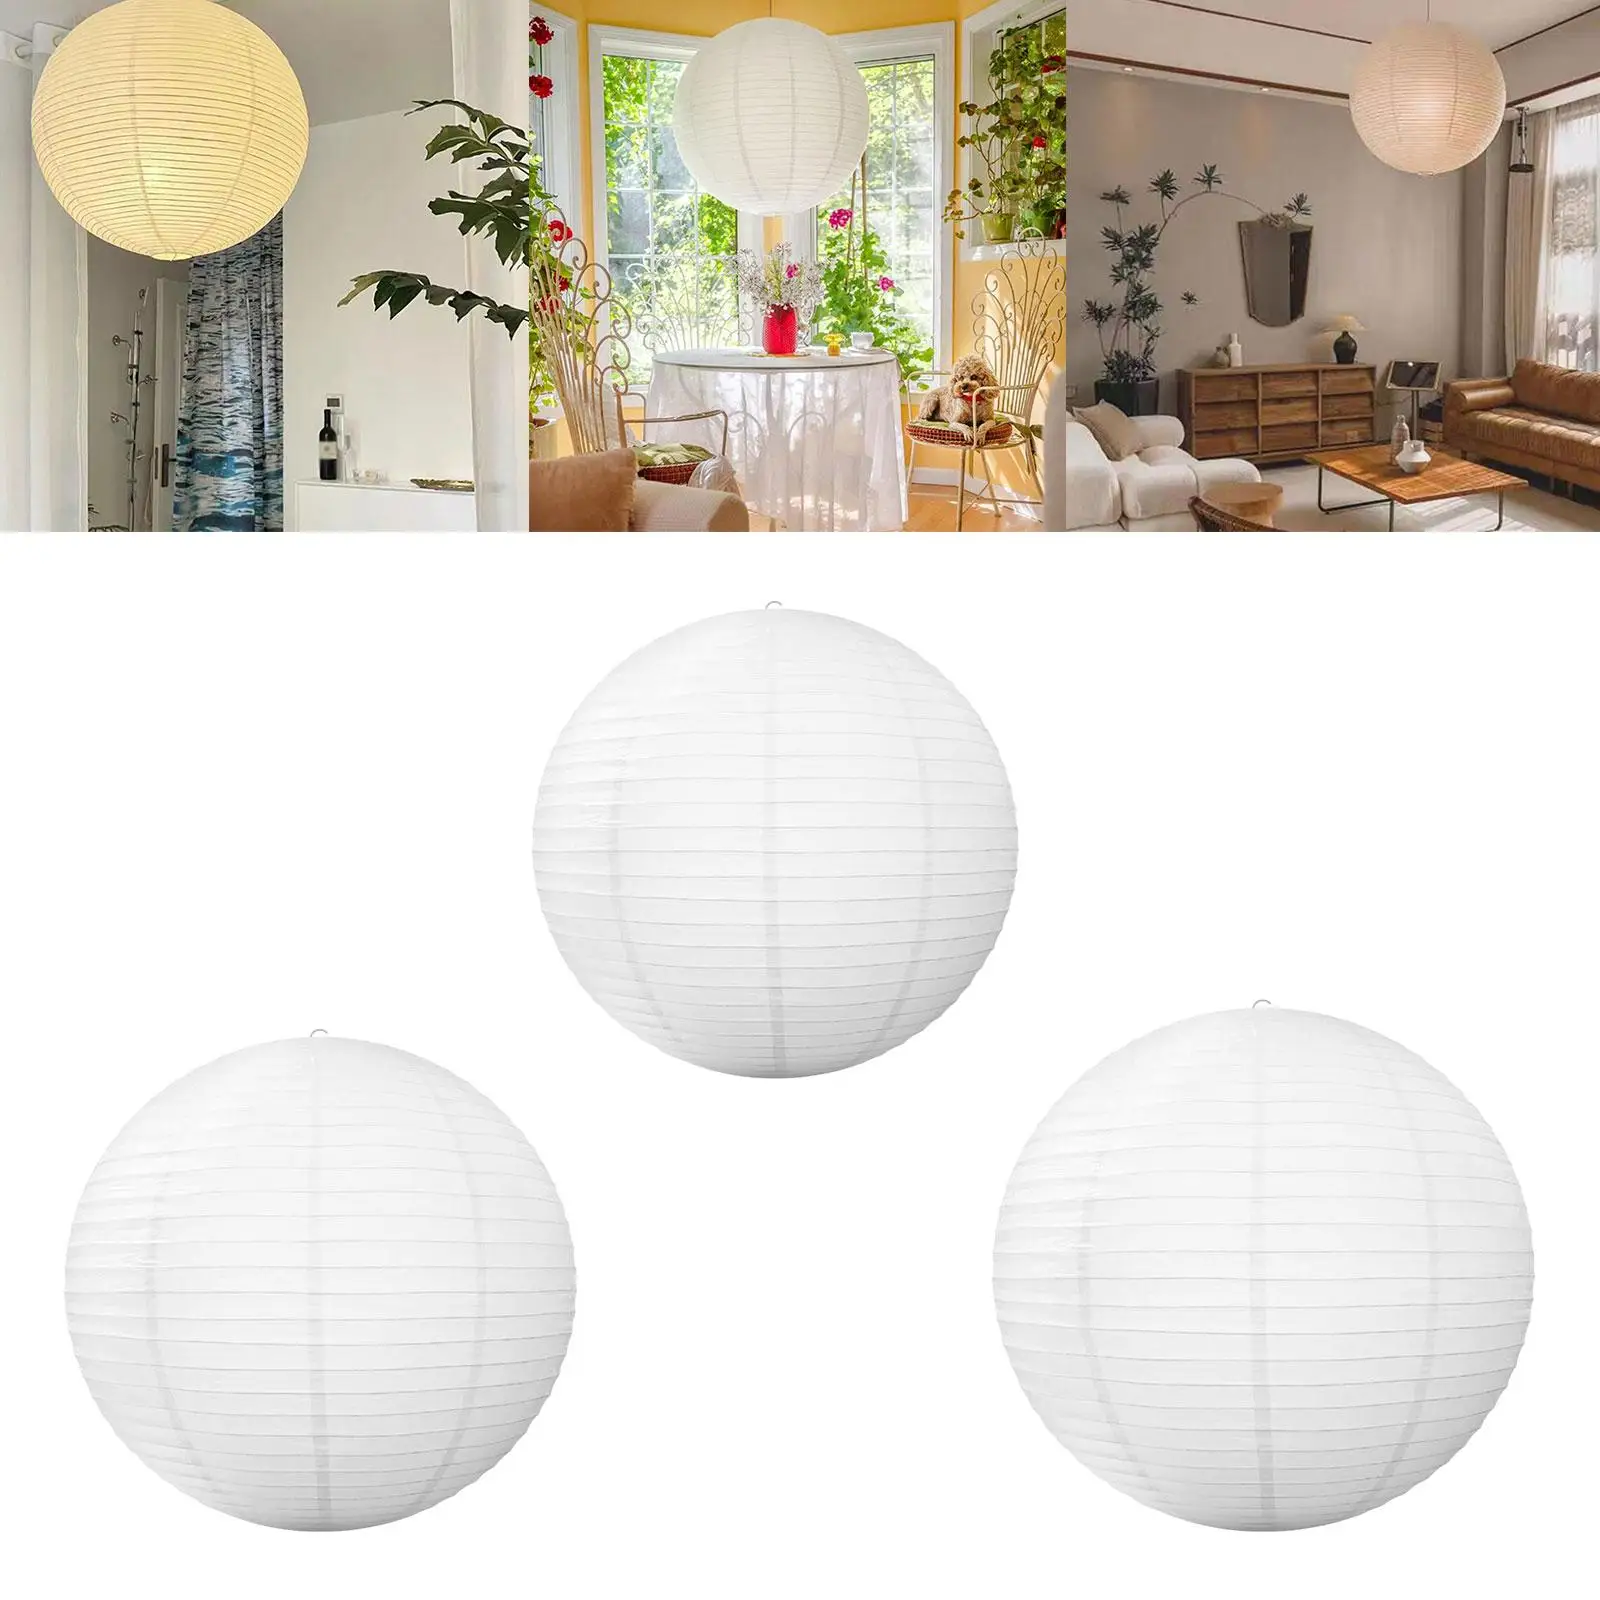 Rice Paper Lamp Shade Nordic Japanese Ceiling Light Cover Round Paper Lantern for Dining Room Wedding Kitchen Bedroom Decoration